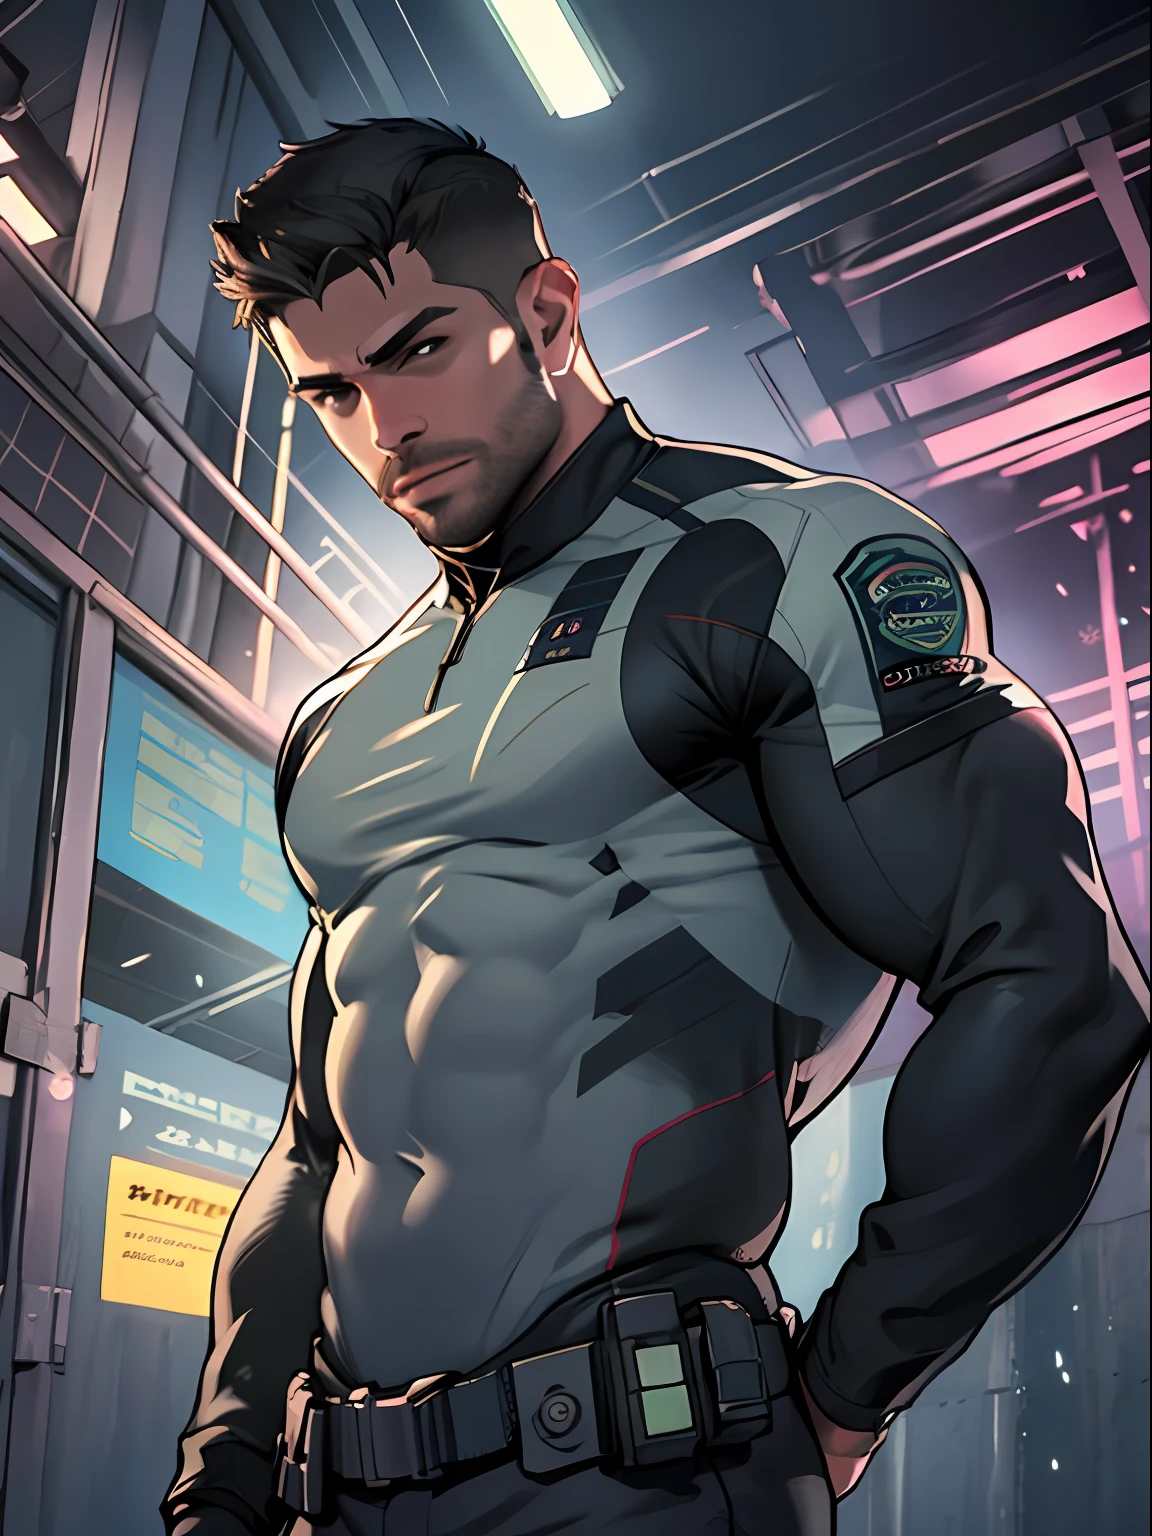 1 men, 独奏, 35 year old, Chris Redfield, wearing grey T shirt, smiles, black color on the shoulder and a BSAA logo on the shoulder, millitary tactical suit, alto e hunk, biceped, sit-ups, 가슴, best qualityer, Masterpiece artwork, high resolution: 1.2, upper body shot, black dark shadowy corridor in the background, face detailed, ombre, volumeric lighting, center focus,  low camera angle, stylish white hair, tatuados,